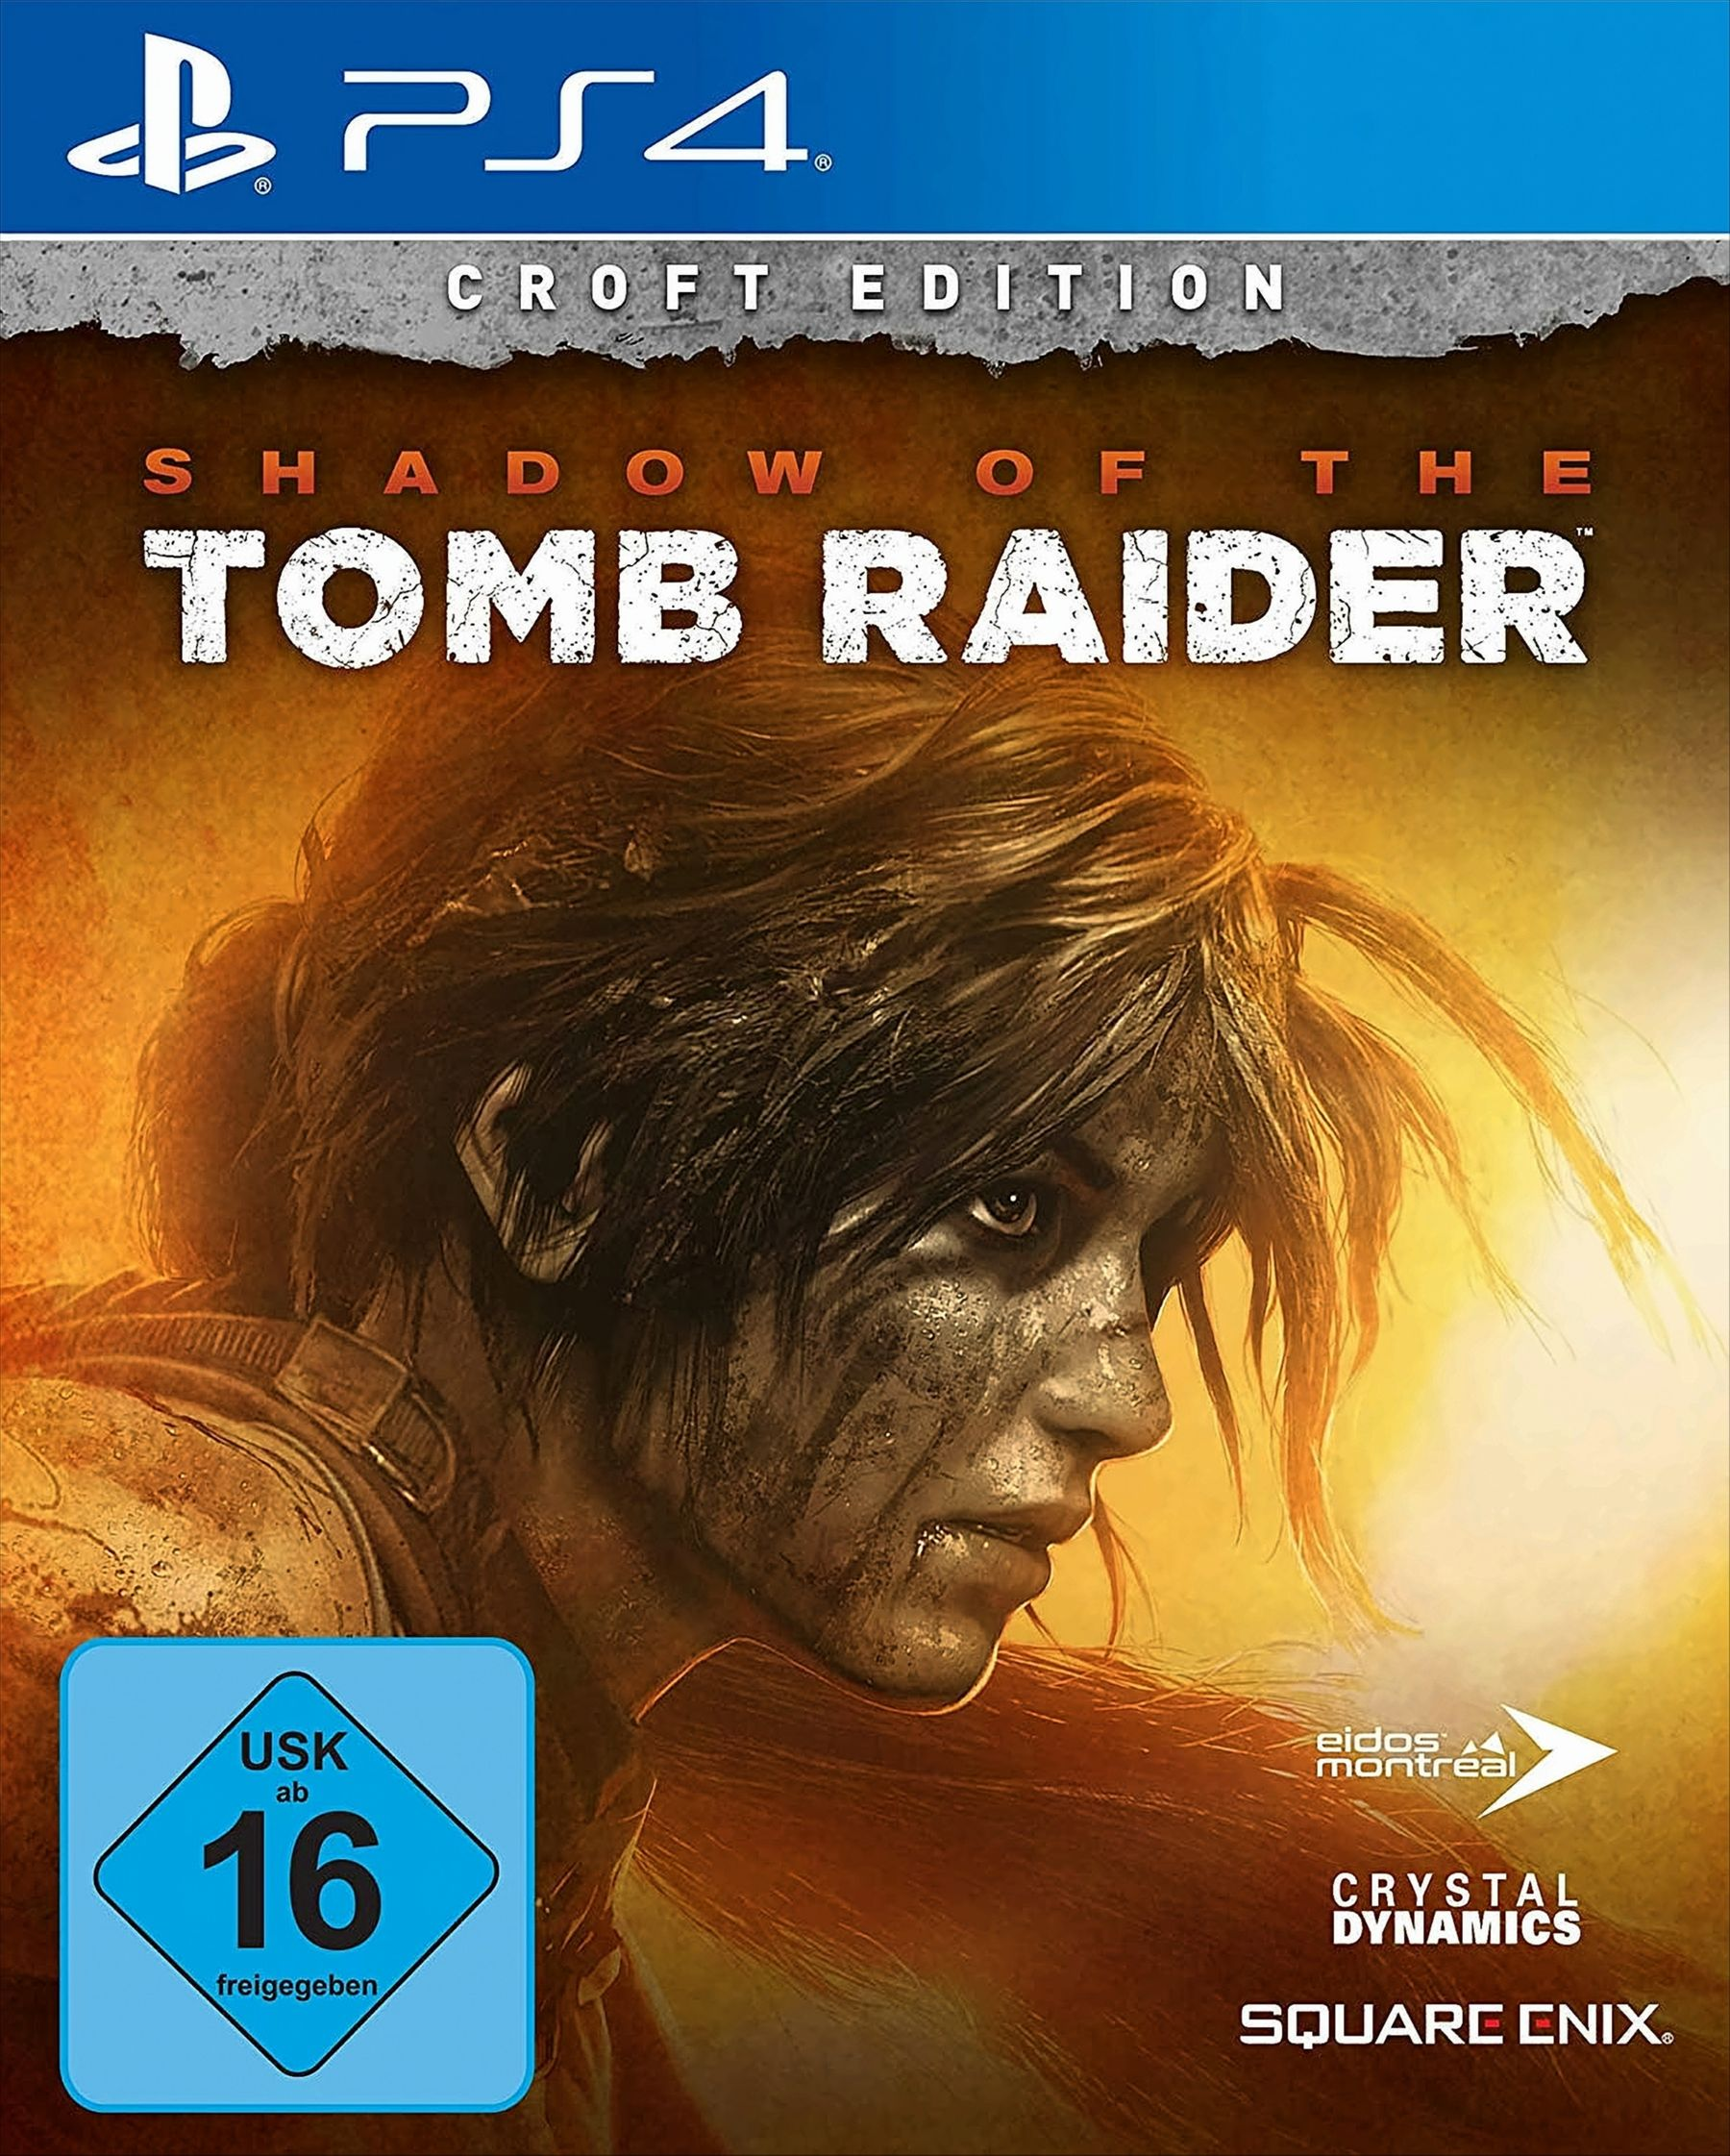 (PS4) 4] (USK) Tomb Shadow Edition - Croft the of Raider [PlayStation